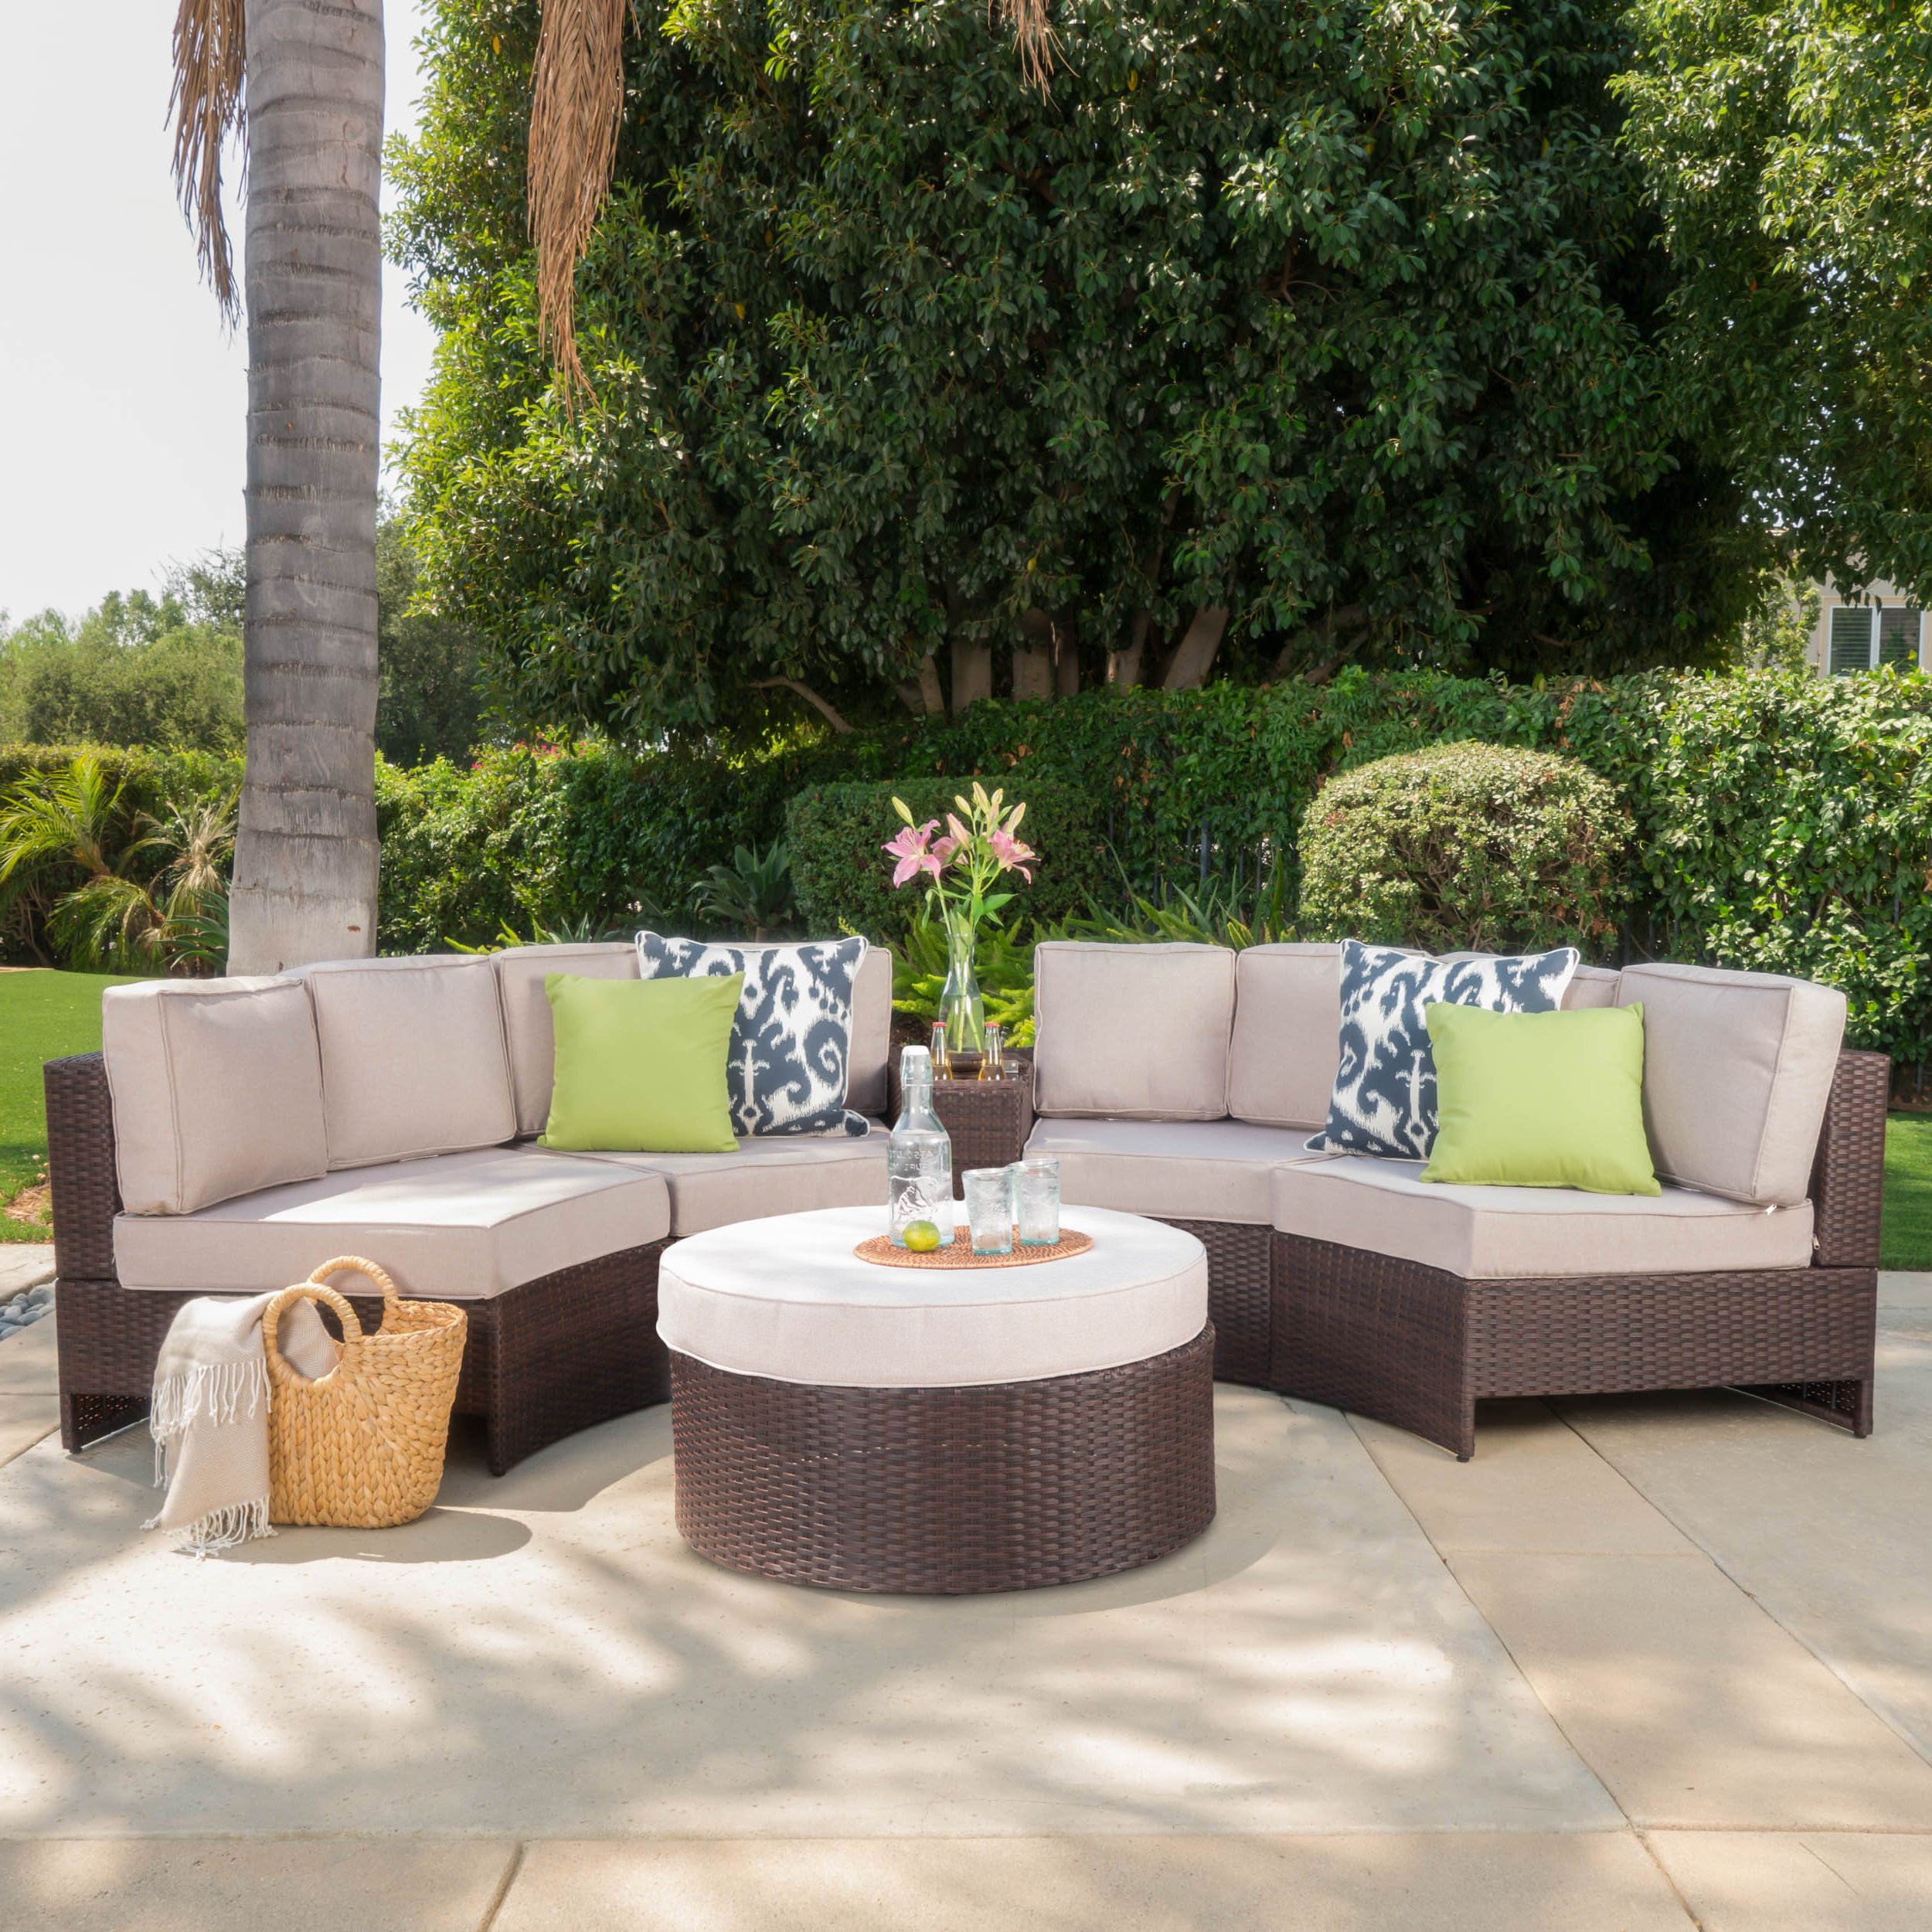 Widely Used Sinclair 6 Piece Outdoor Wicker 1/2 Round Seating Set With Cushions And With Outdoor Seating Sectional Patio Sets (View 4 of 15)